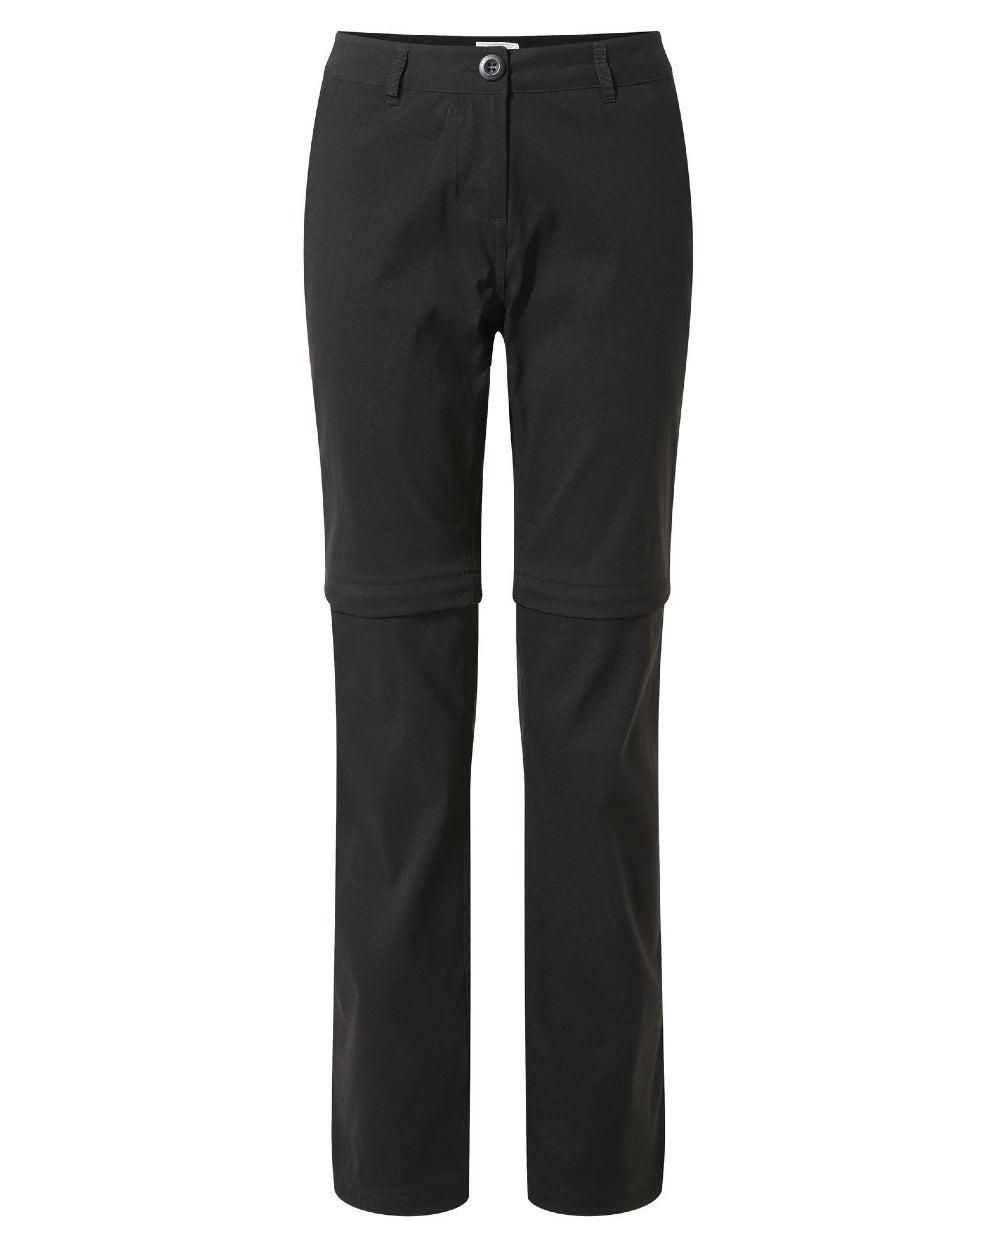 Black Coloured Craghoppers Womens Kiwi Pro II Convertible Trousers On A White Background 